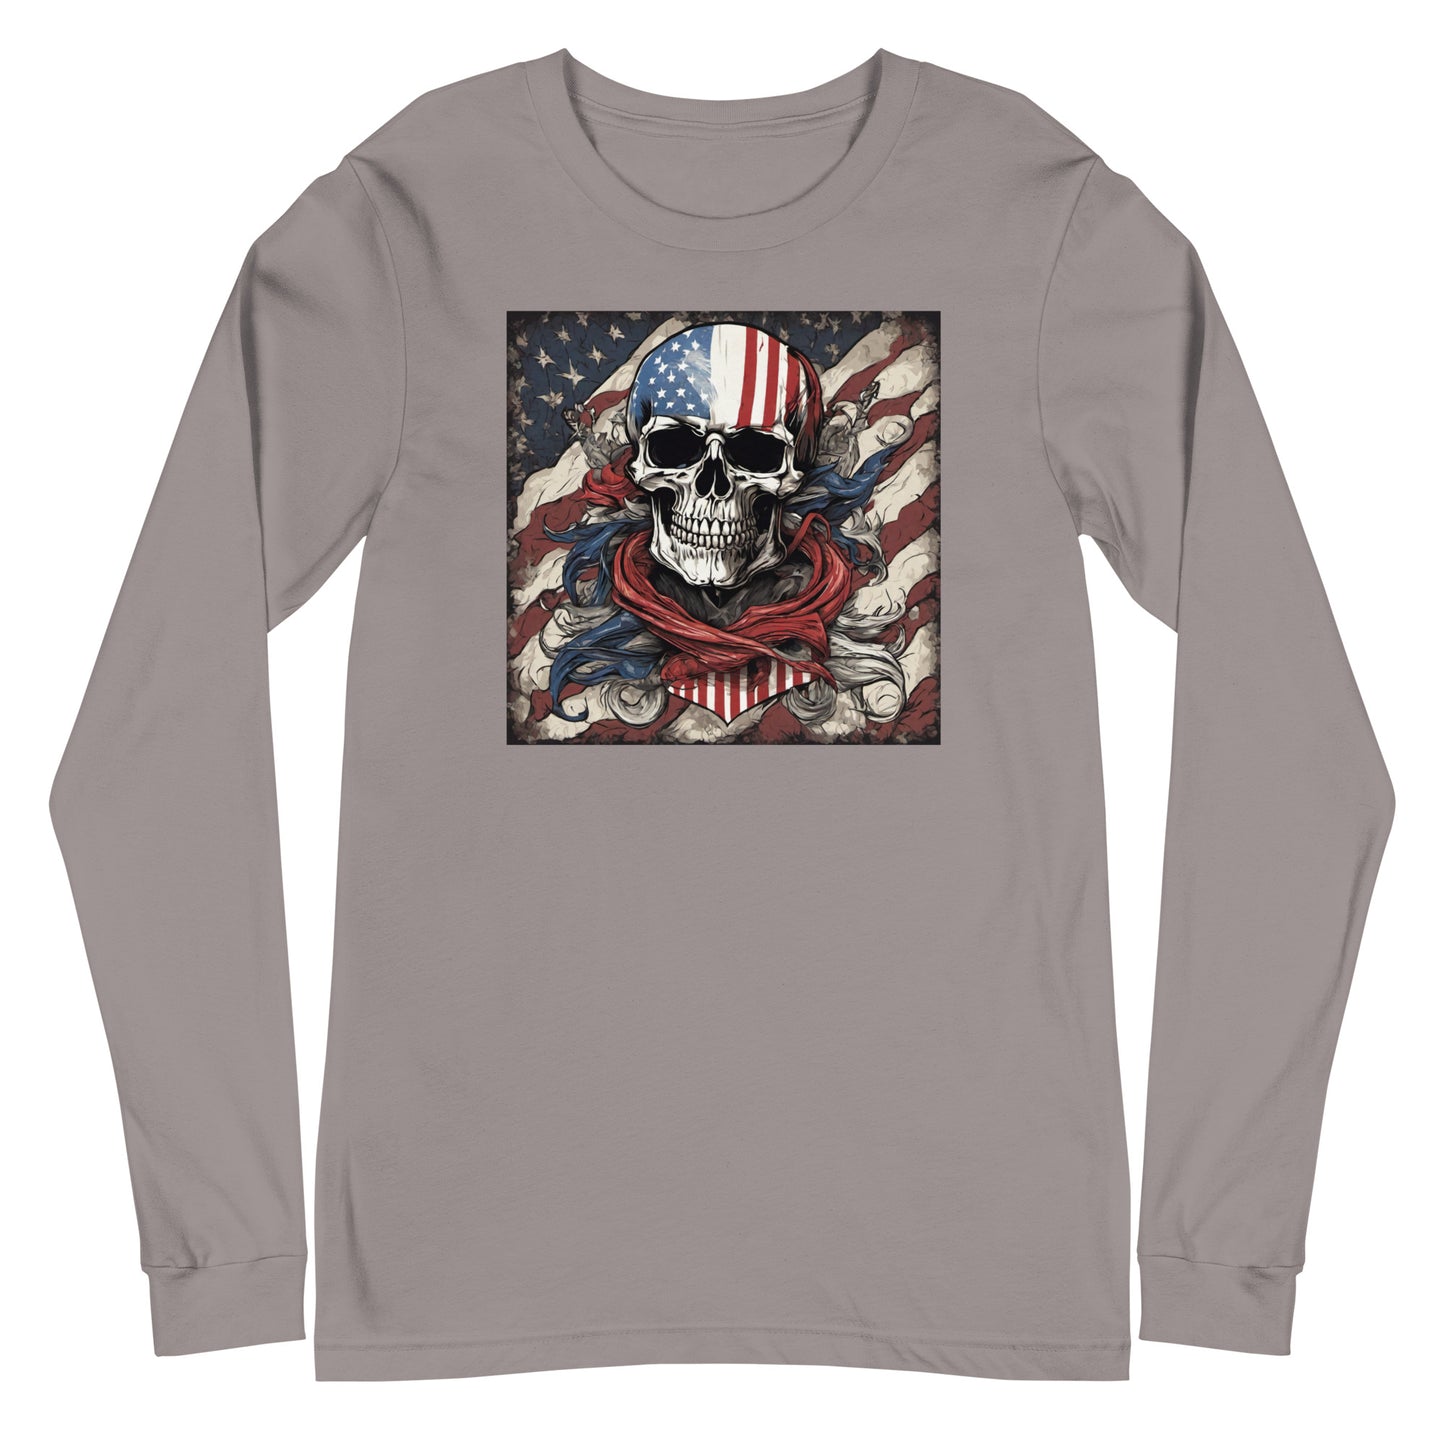 Red, White, & Blue Swashbuckler Long Sleeve Tee Storm